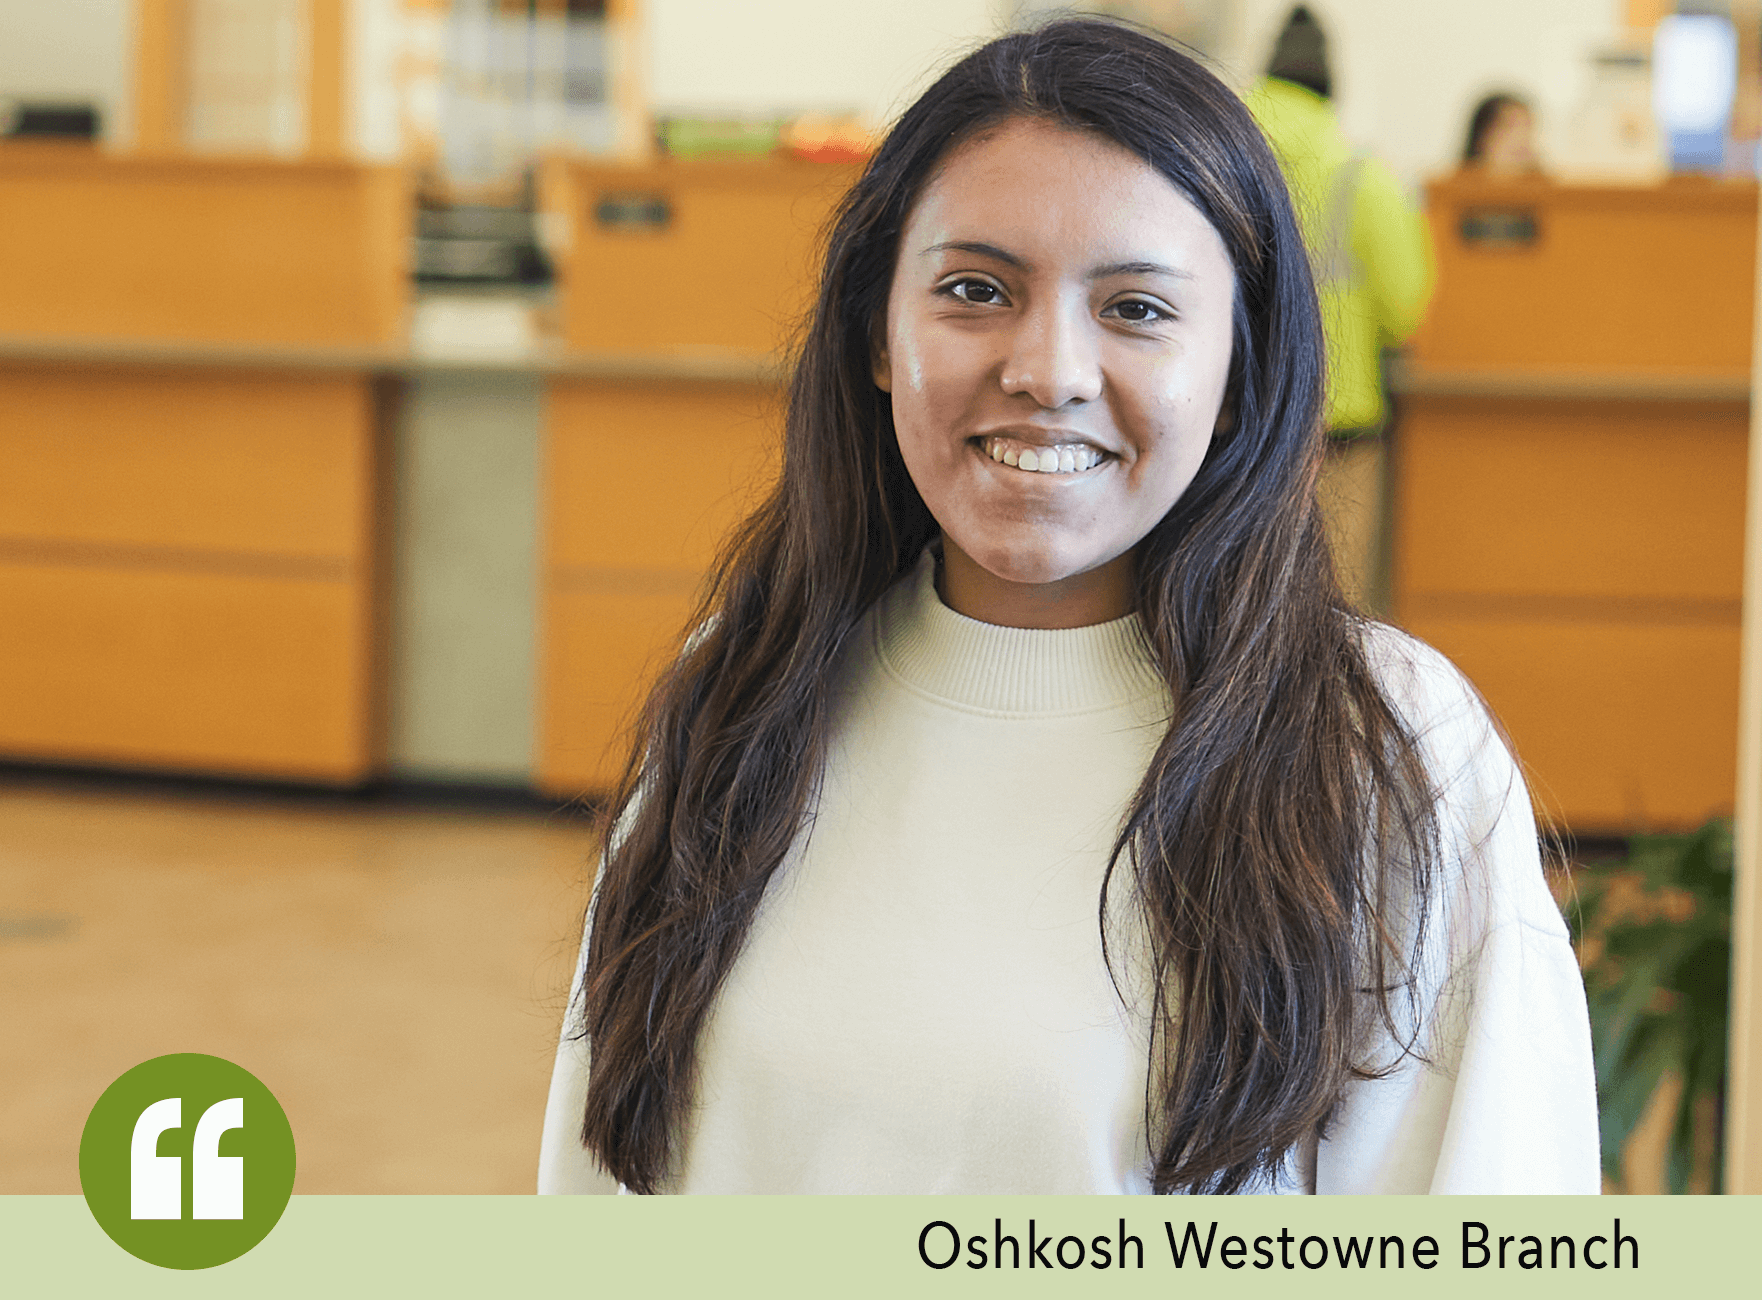 Woman with dark hair and white shirt inside the Oshkosh Westowne Branch of Community First